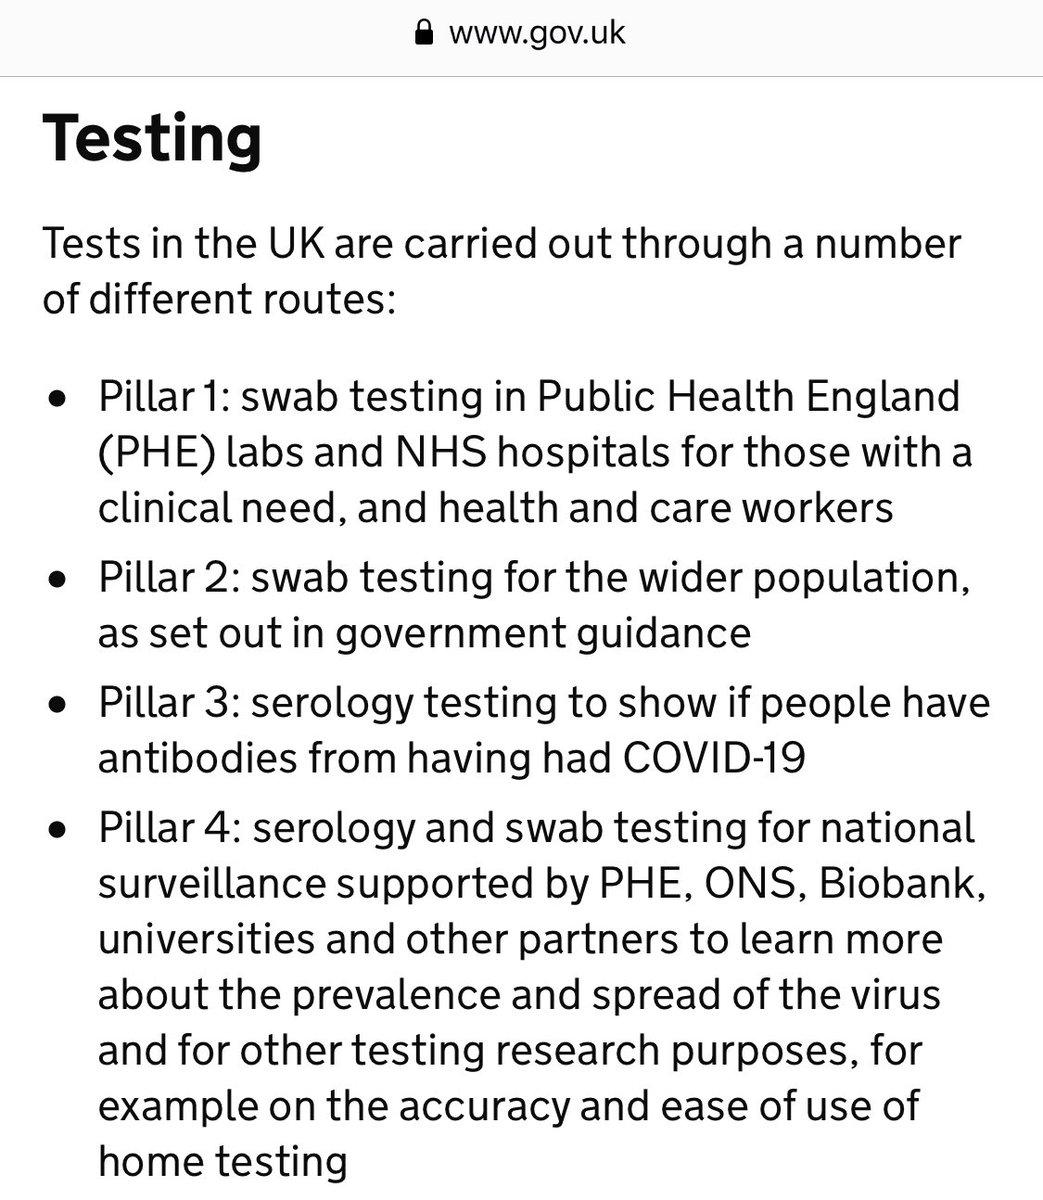 42.Q What are 'the pillars'? AQ How is each local authority doing for testing?AQ What are the top 3 cities? A Leicester, Bradford, BarnsleyQ Is there an interactive map? A https://news.sky.com/story/coronavirus-bradford-and-london-boroughs-among-36-at-risk-areas-that-could-be-just-days-away-from-local-lockdowns-12018594Q. Why does every little thing have to be DRAGGED out of this govt?